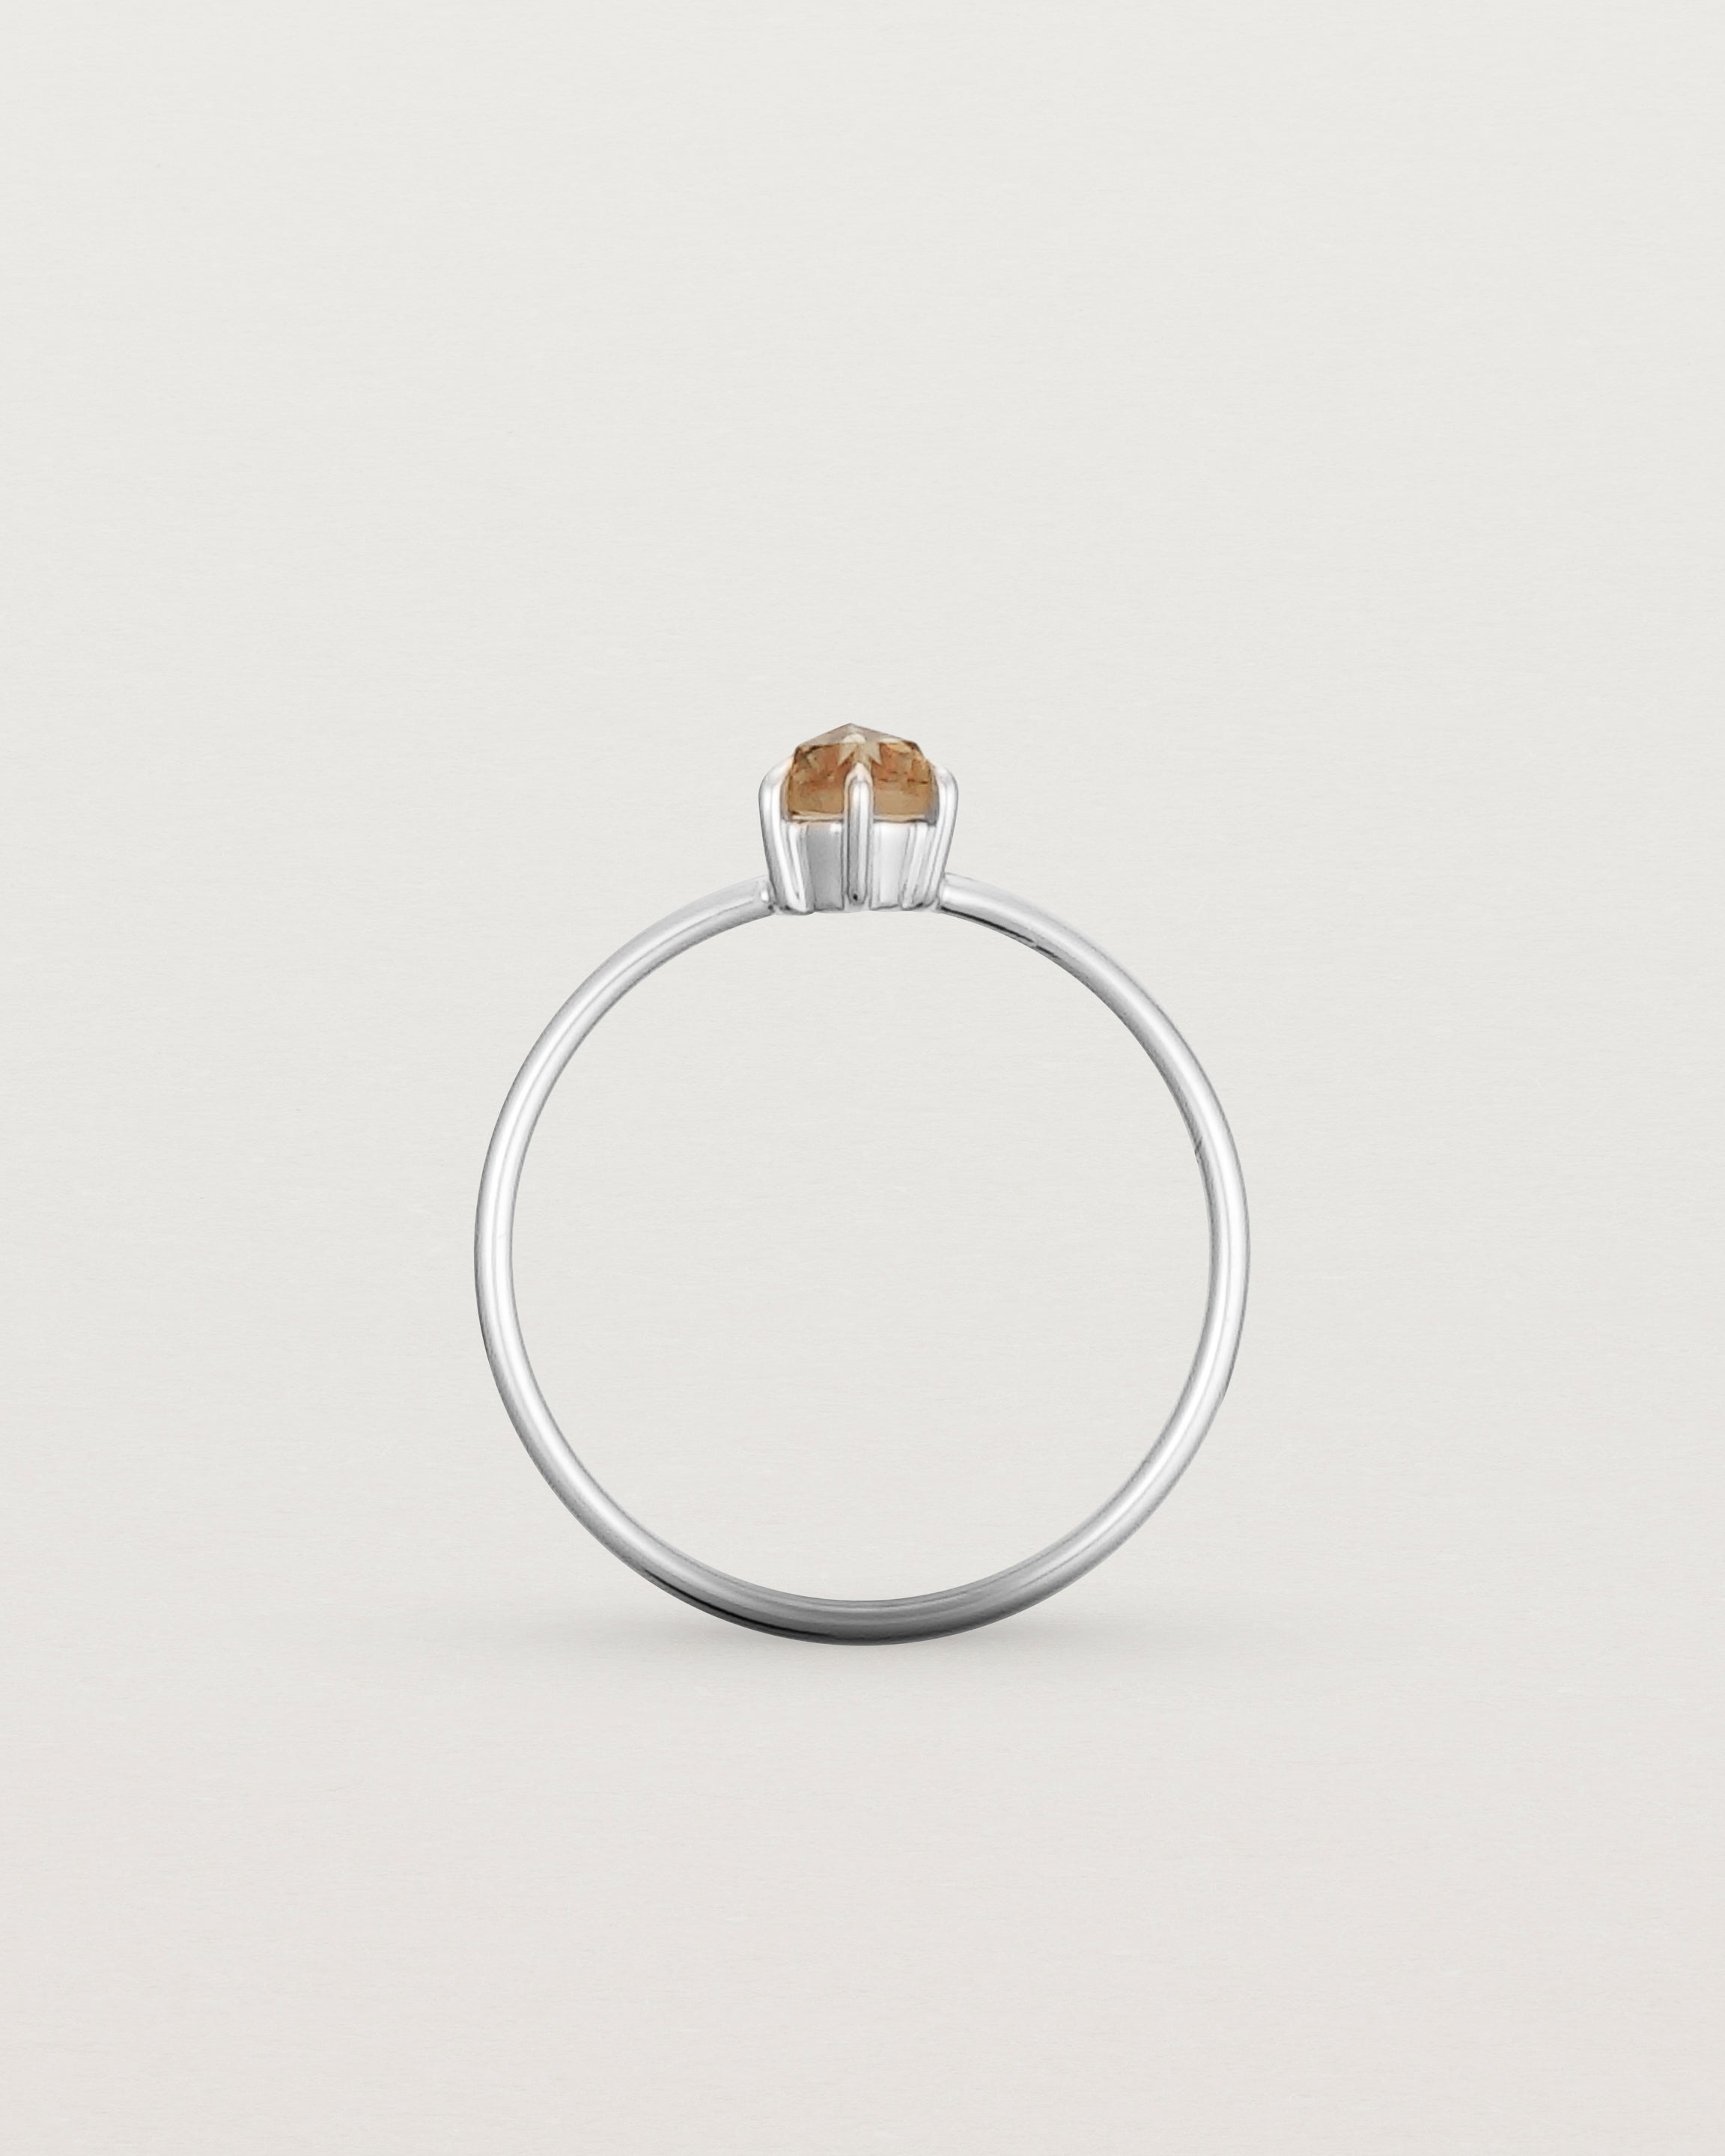 Standing view of the Tiny Rose Cut Ring | Honey Quartz | Sterling Silver.